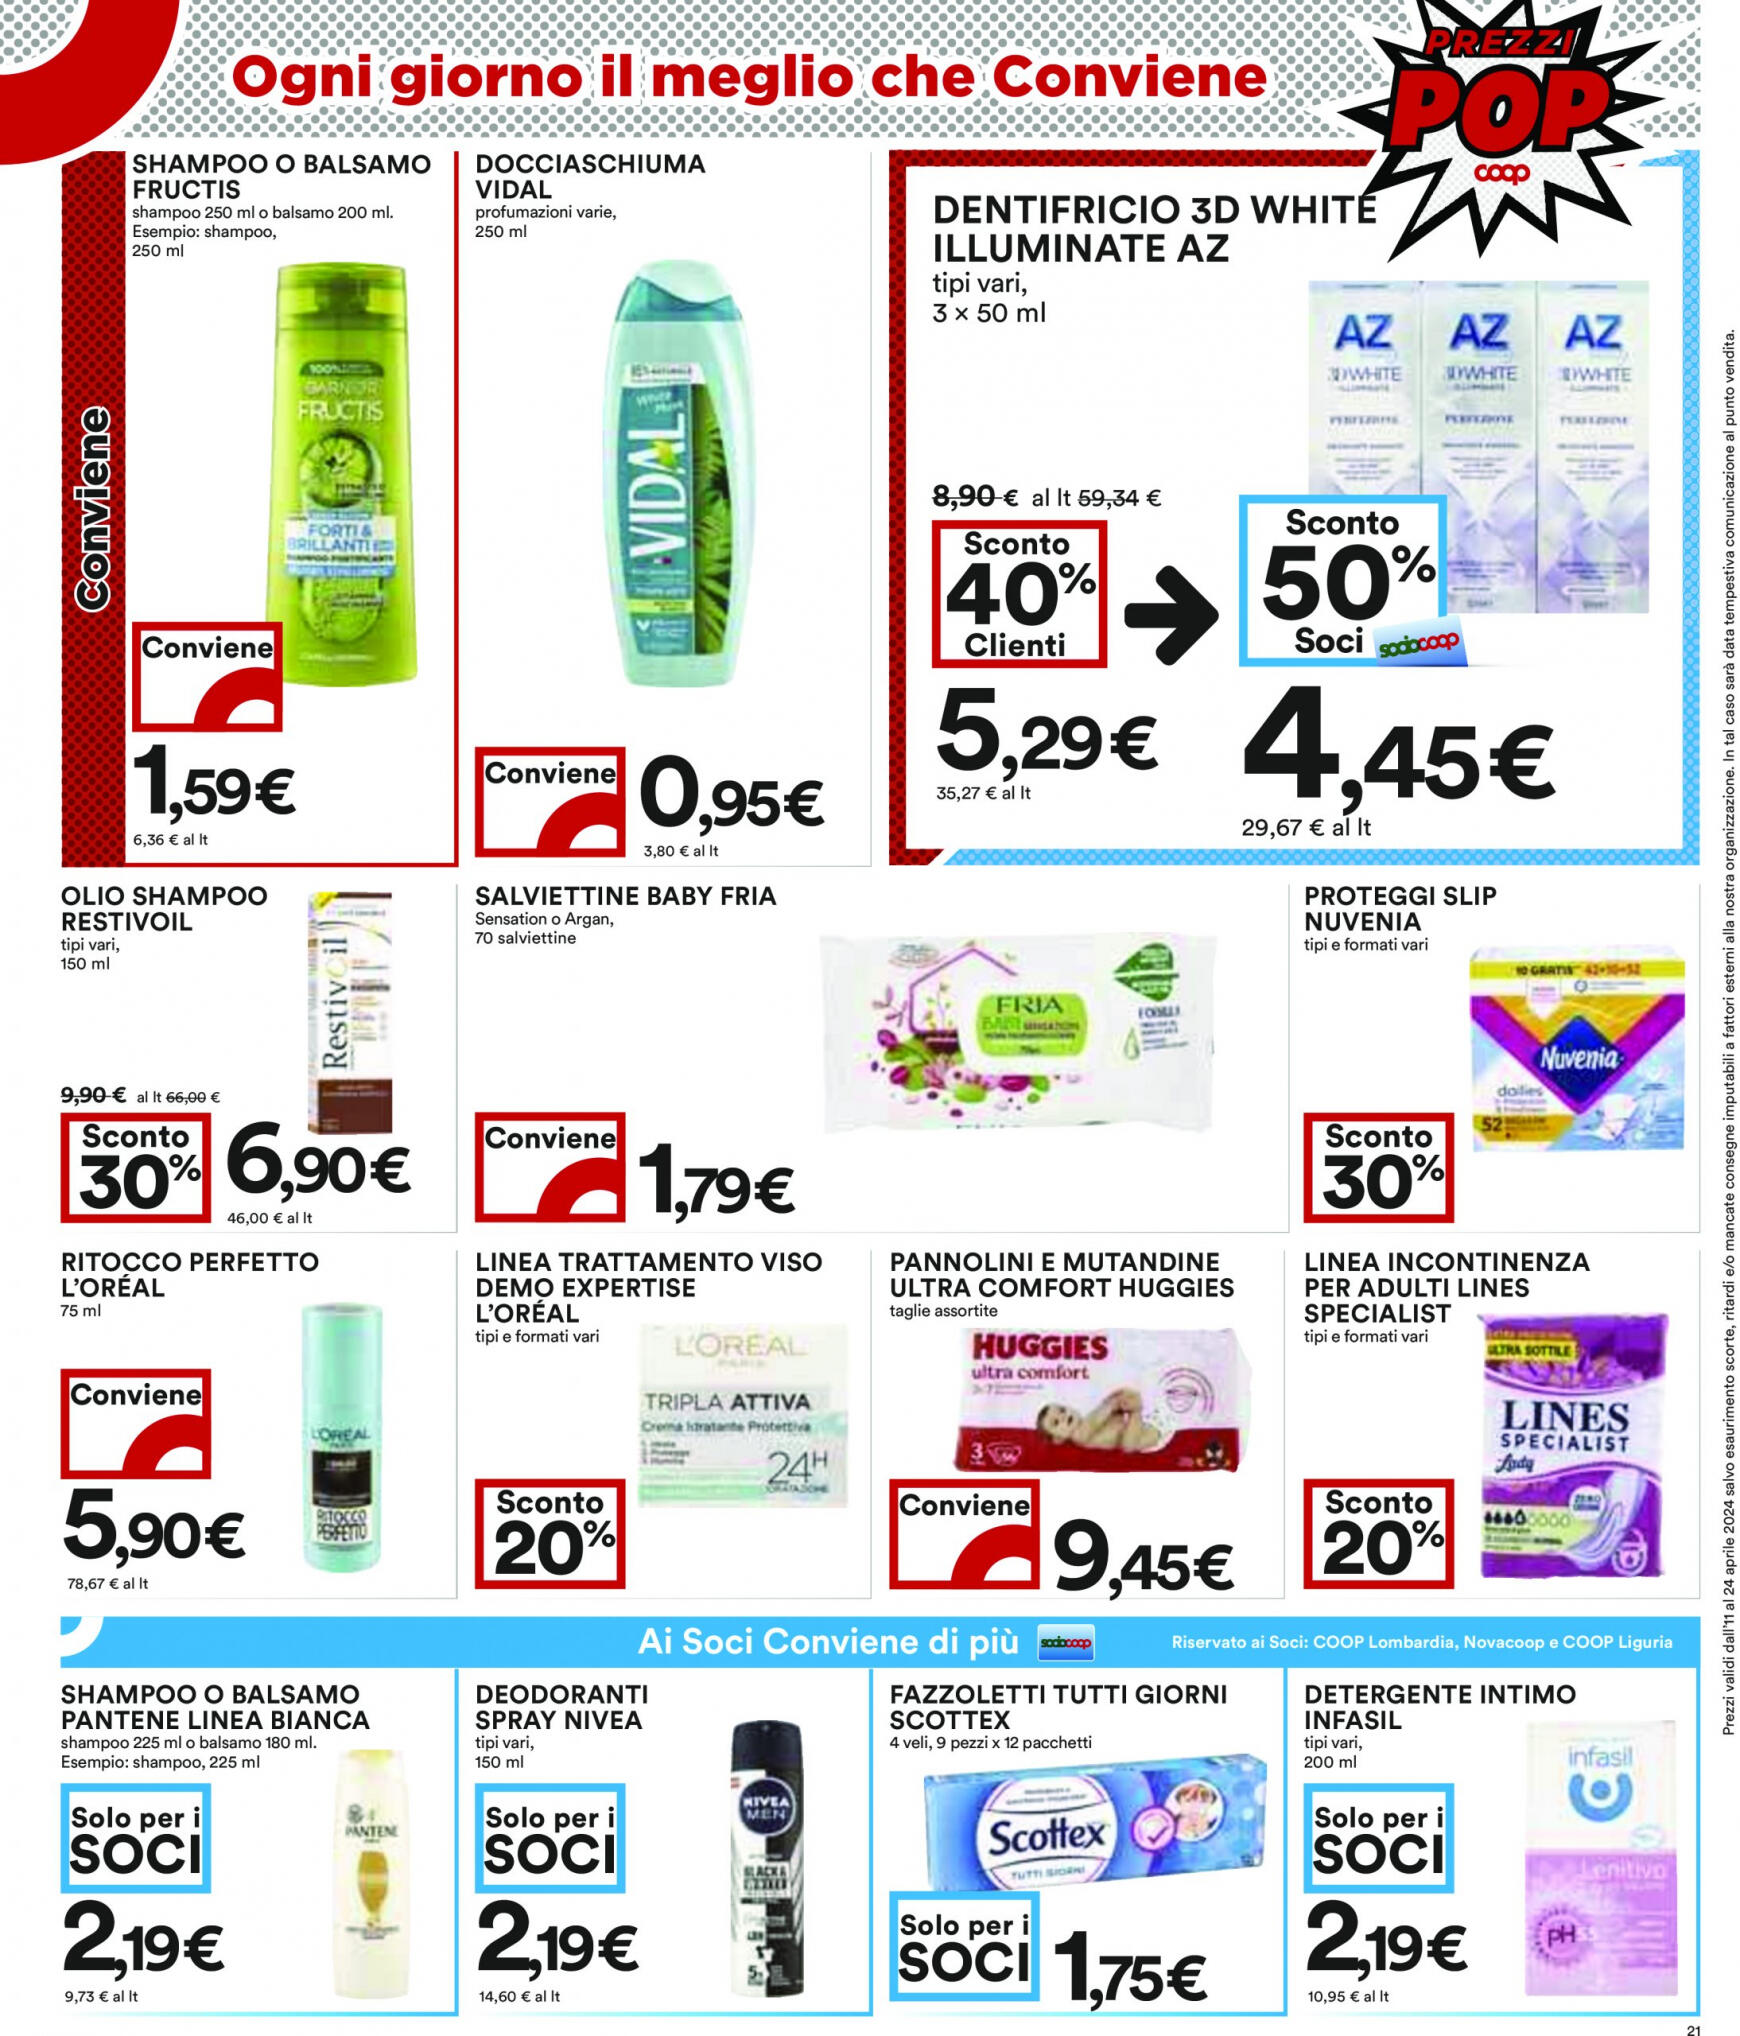 coop - Nuovo volantino Coop 11.04. - 24.04. - page: 21